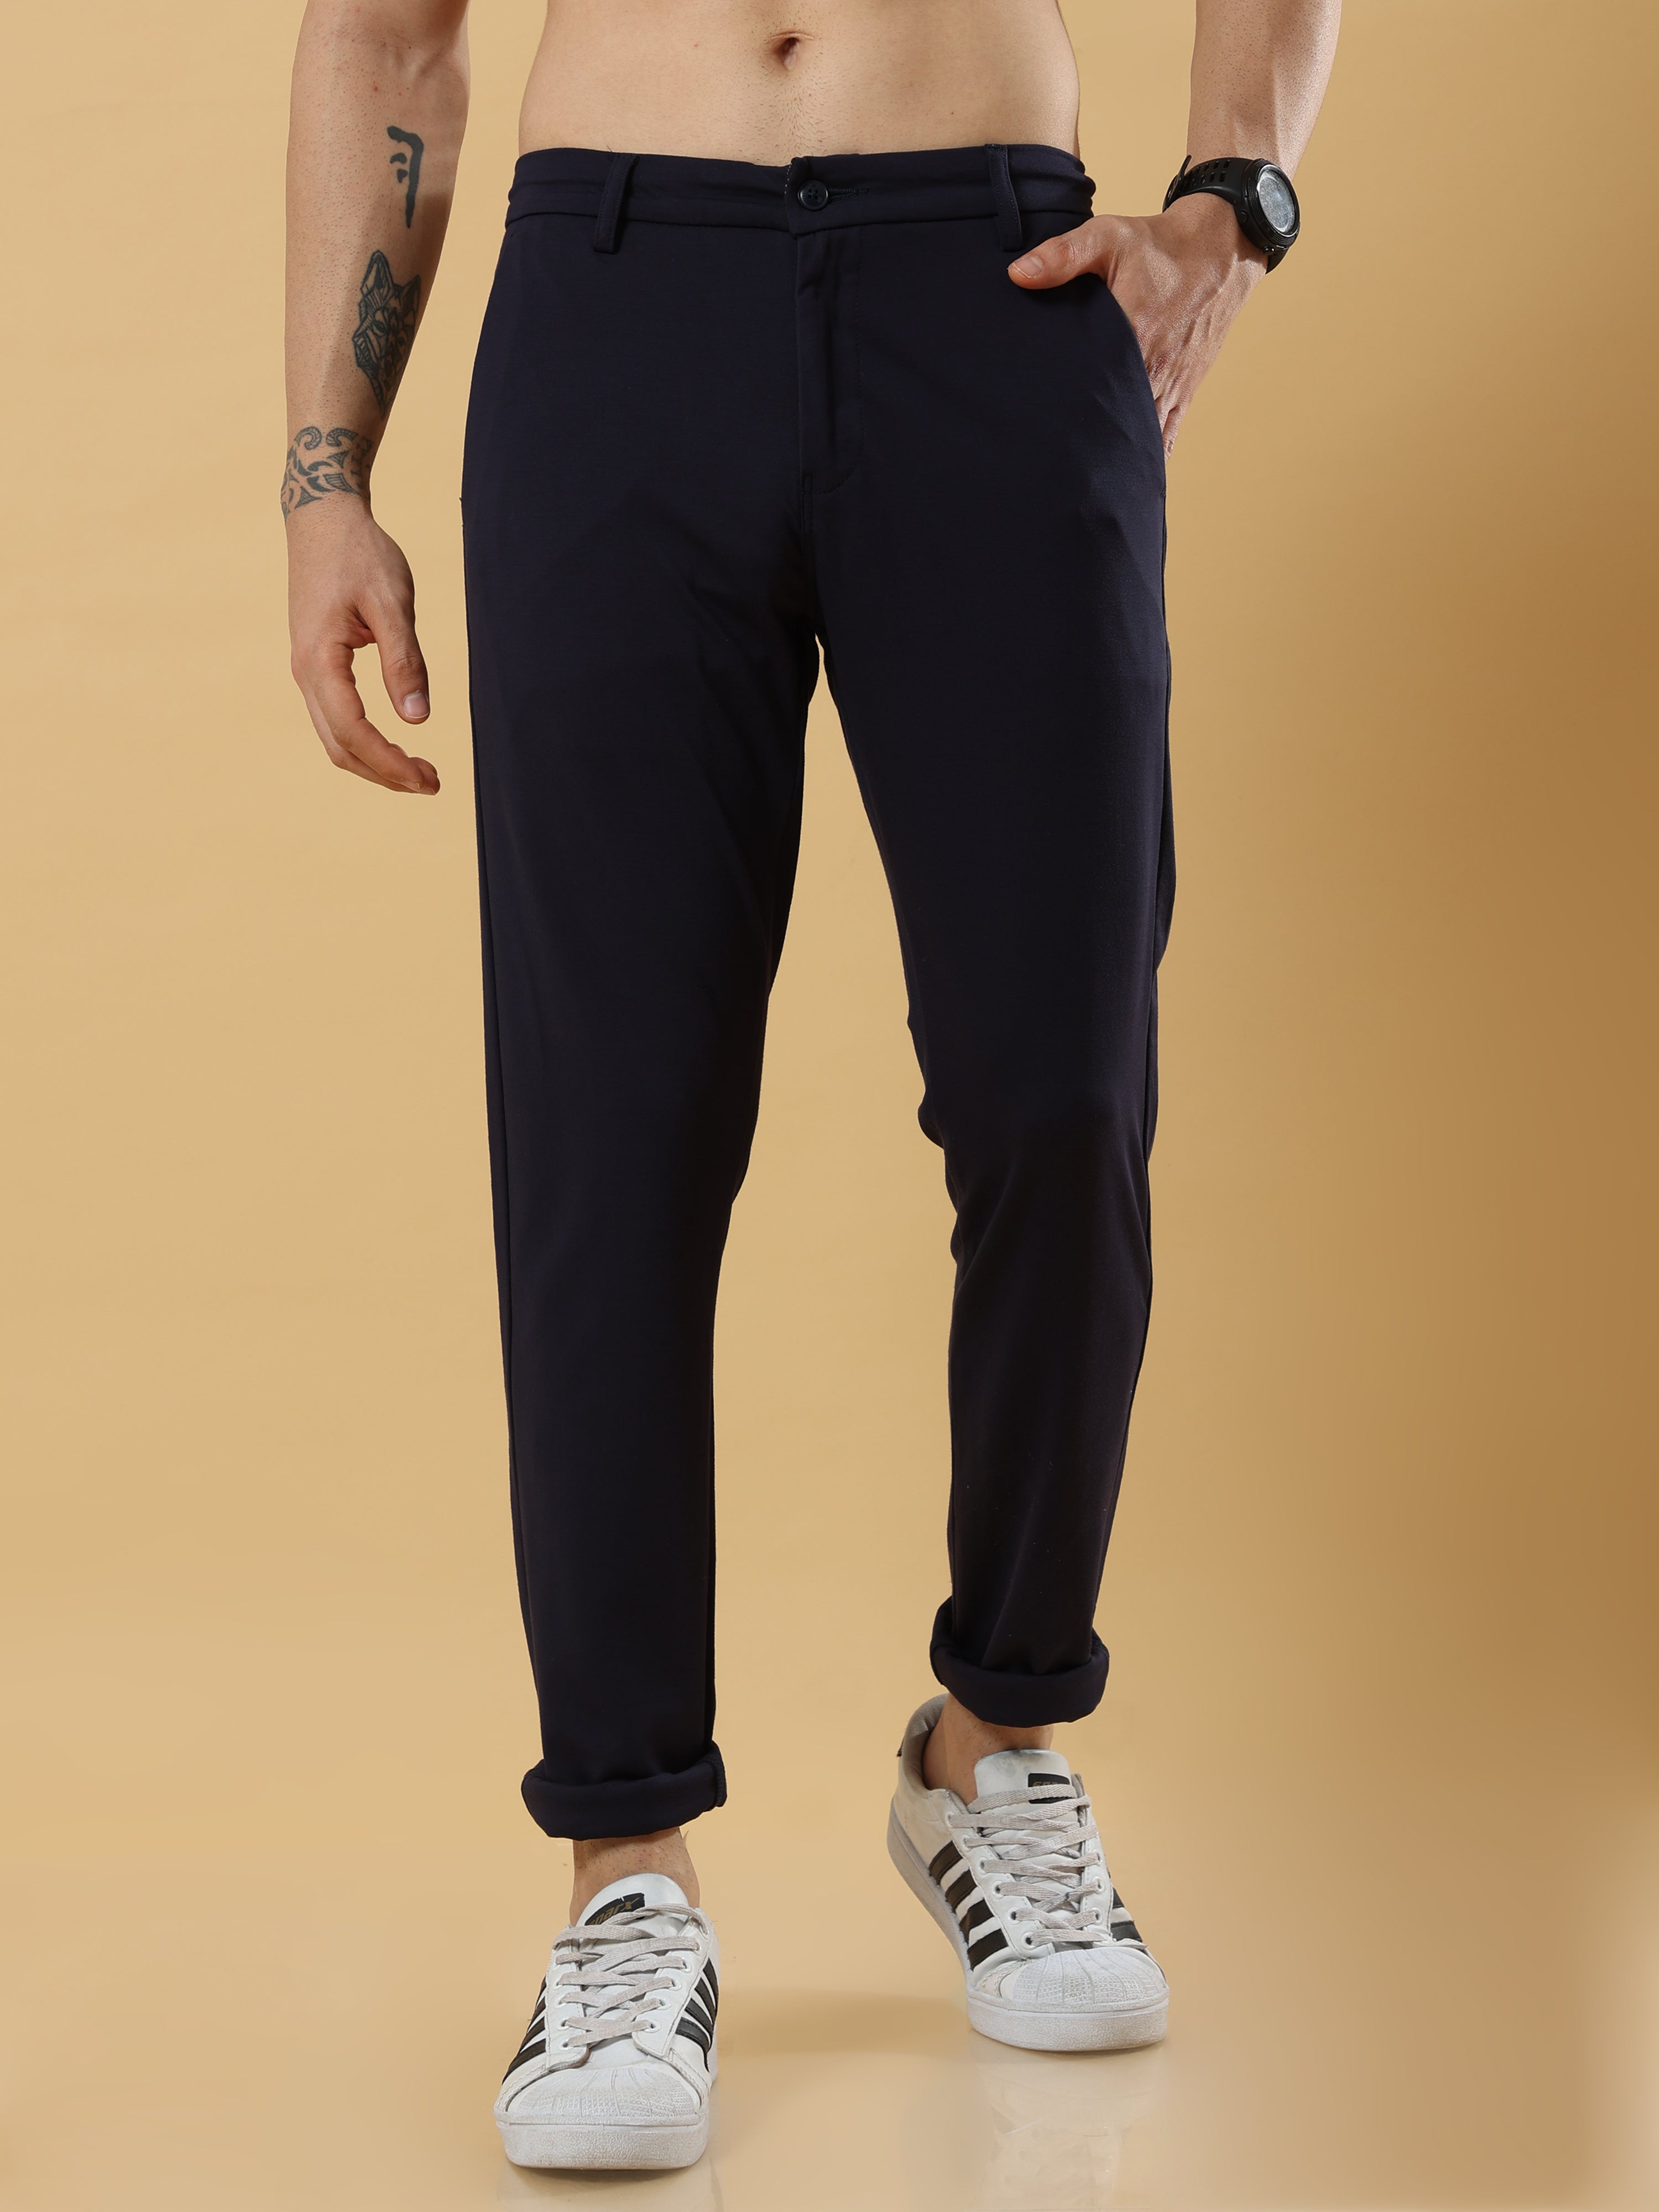 X Ray Men's Stretch Commuter Pants : Target